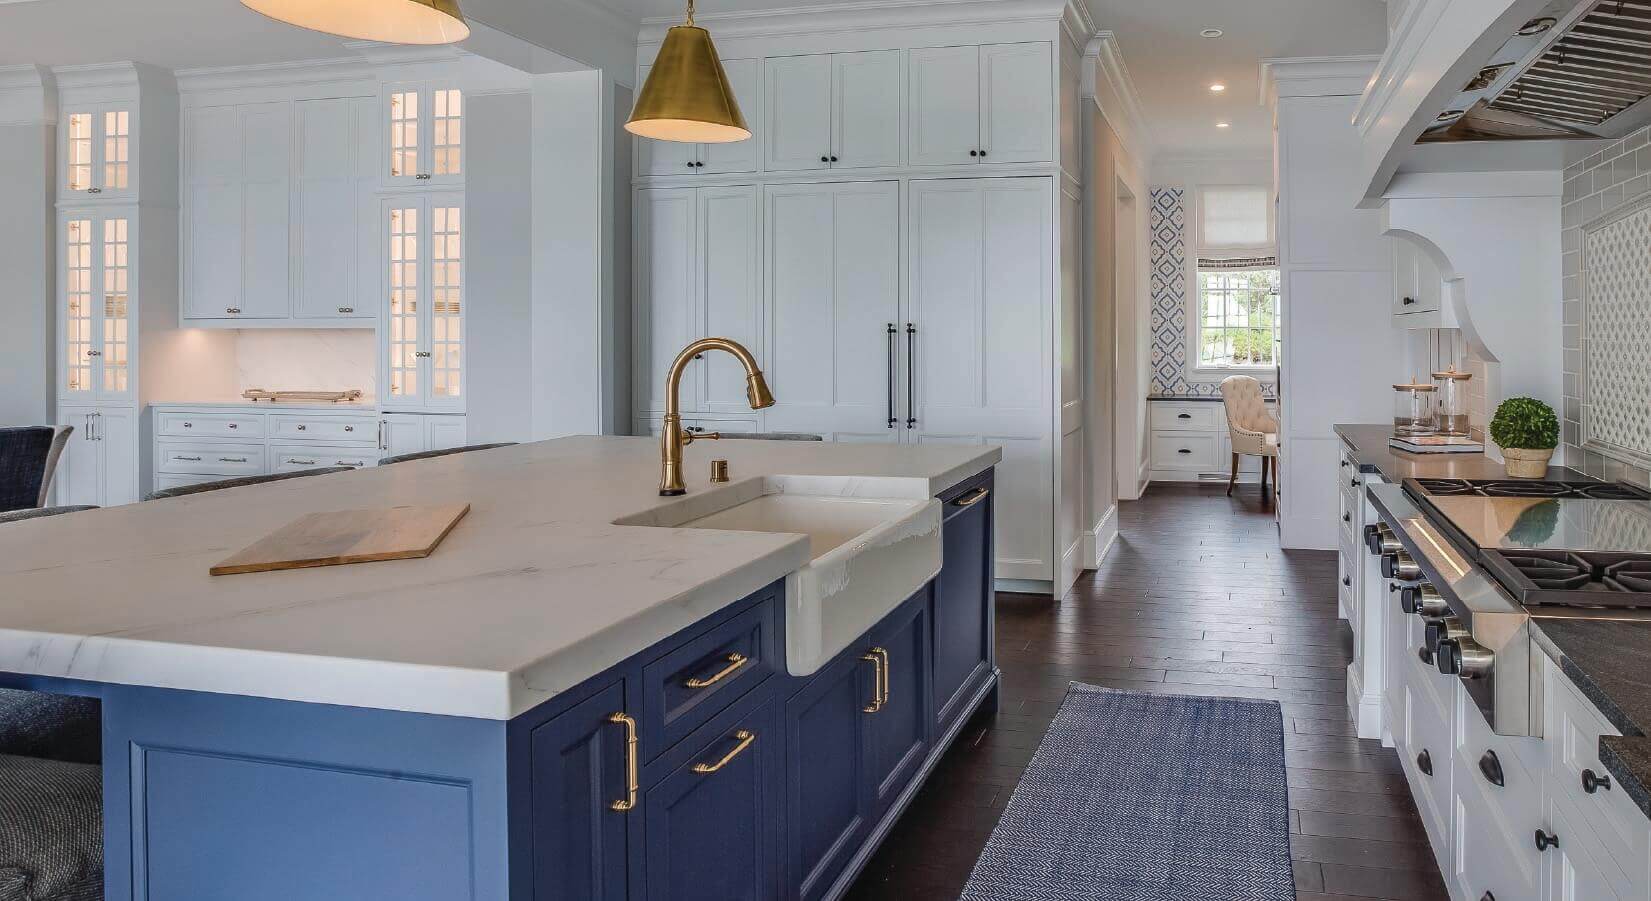 Kitchen with large marble kitchen island with farmhouse sink, dark blue cabinets, and copper faucet and cabinet hardware.